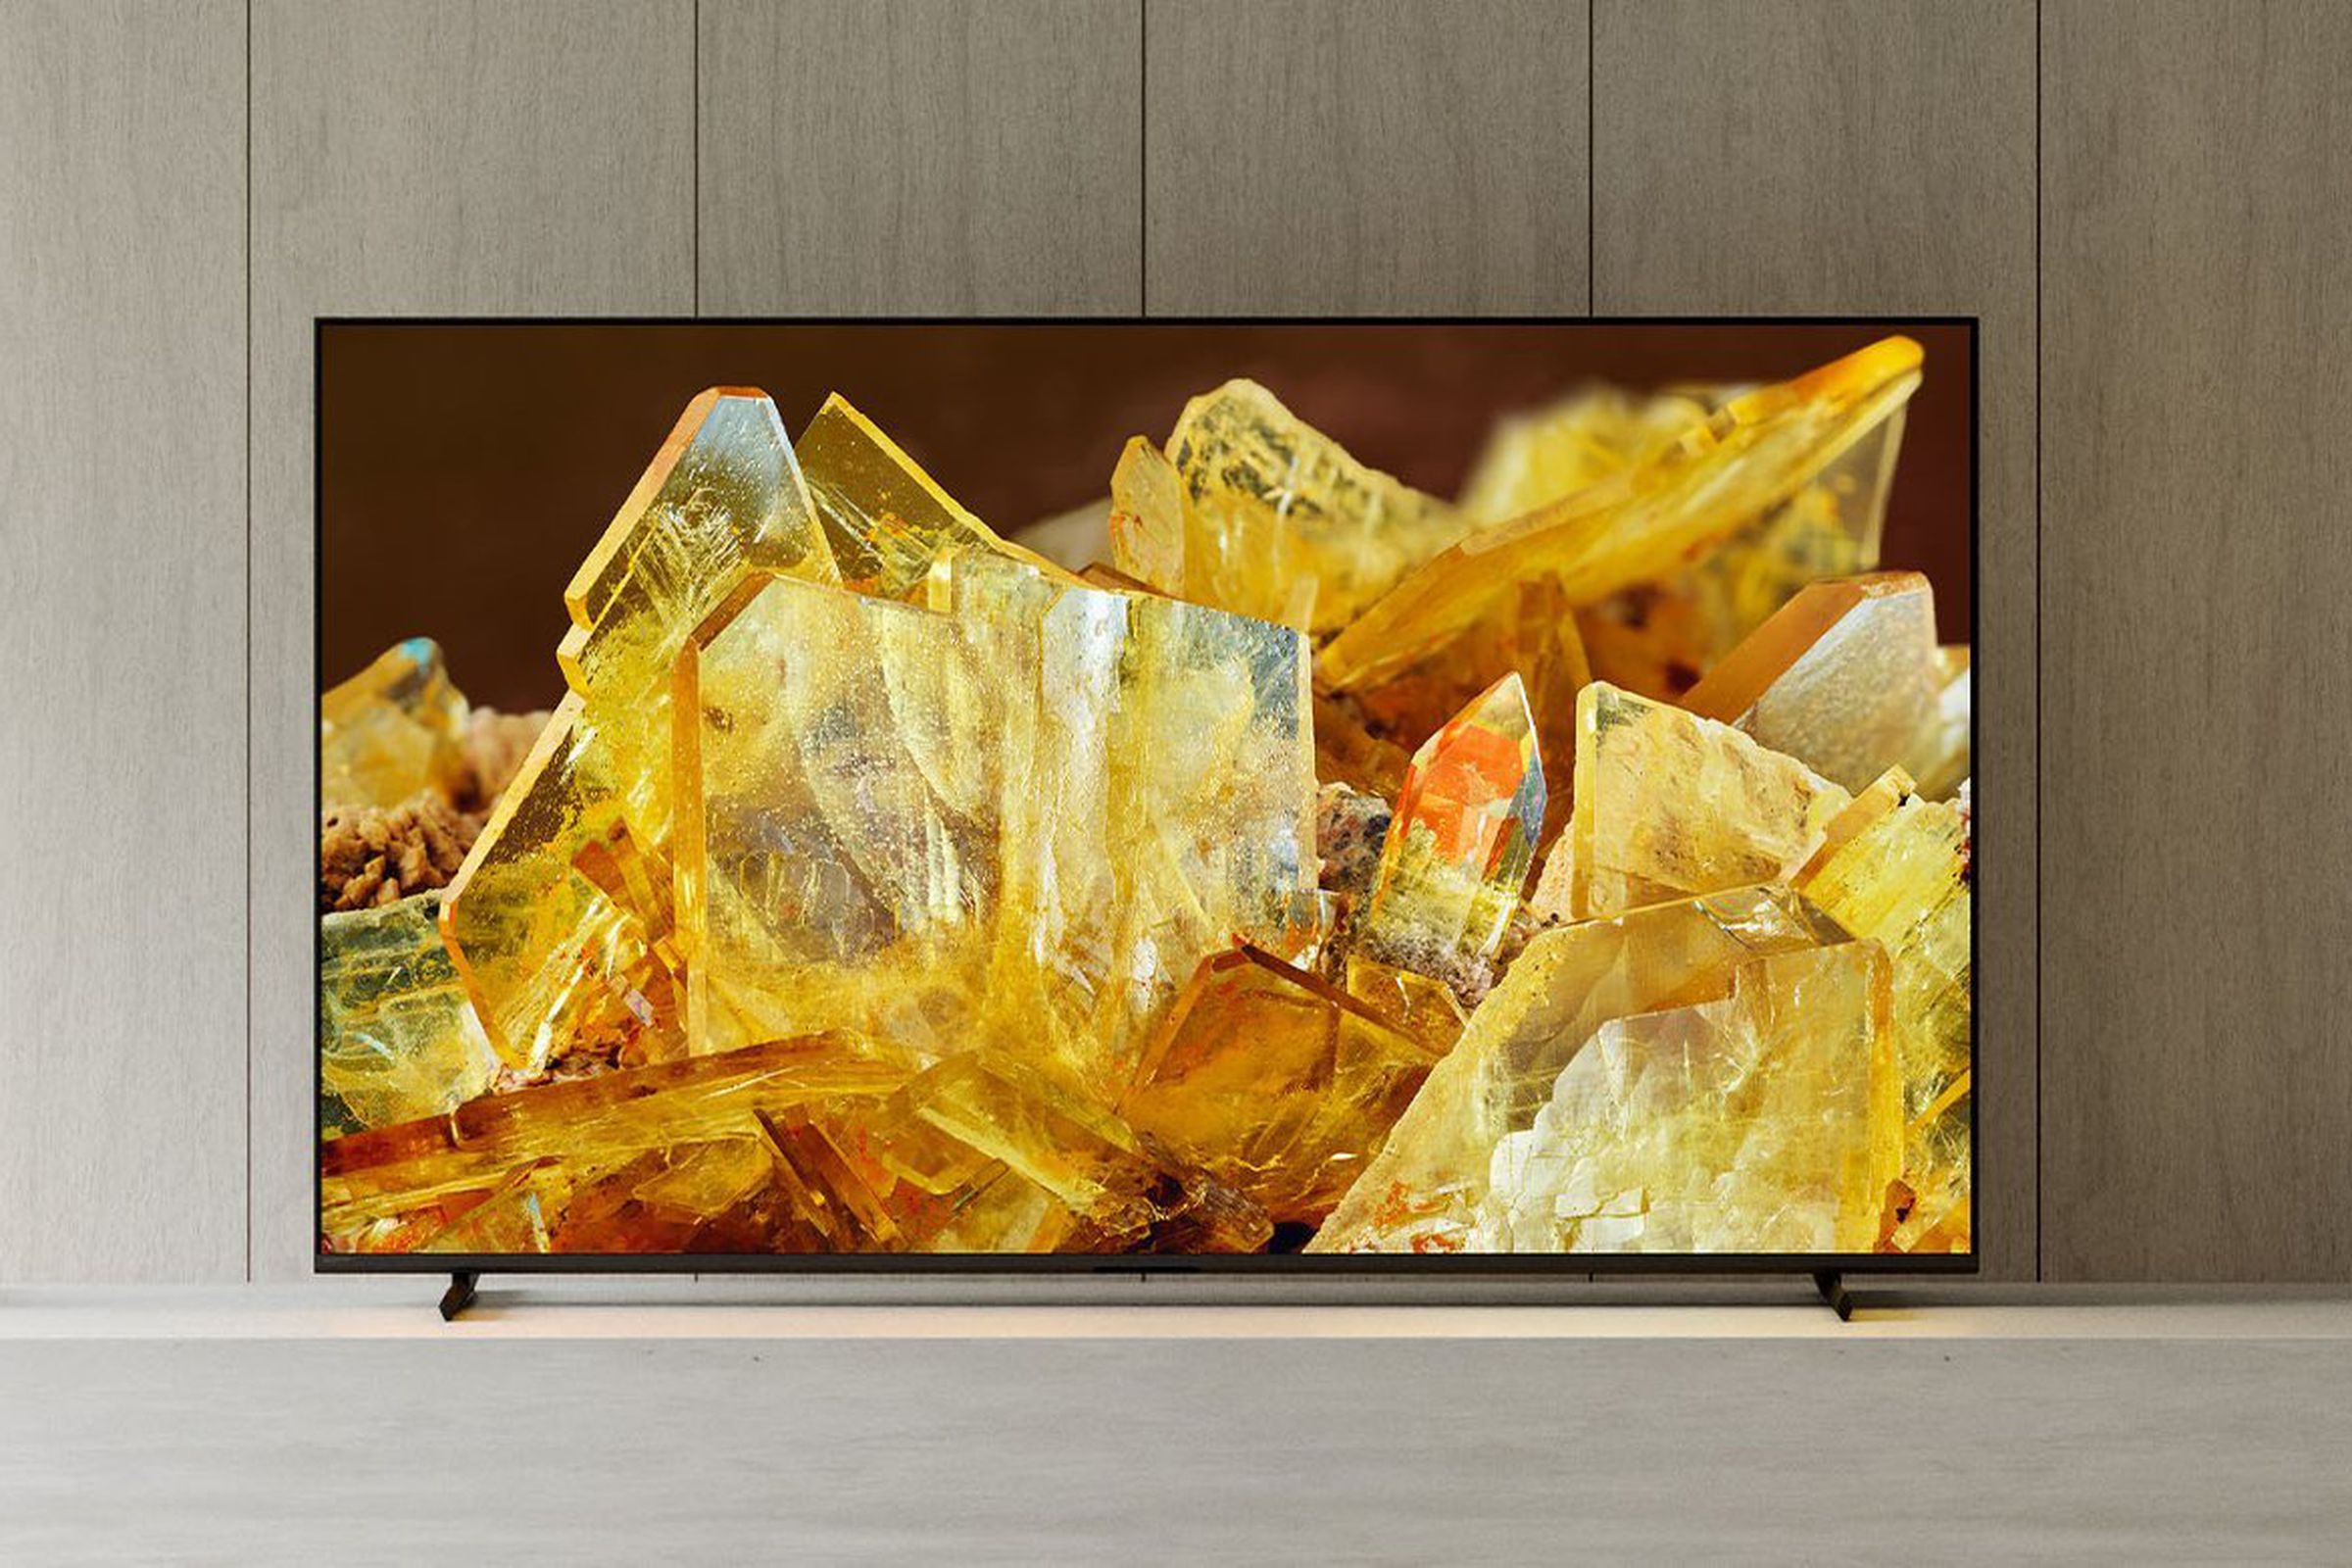 Sony X90L TV sitting on stand